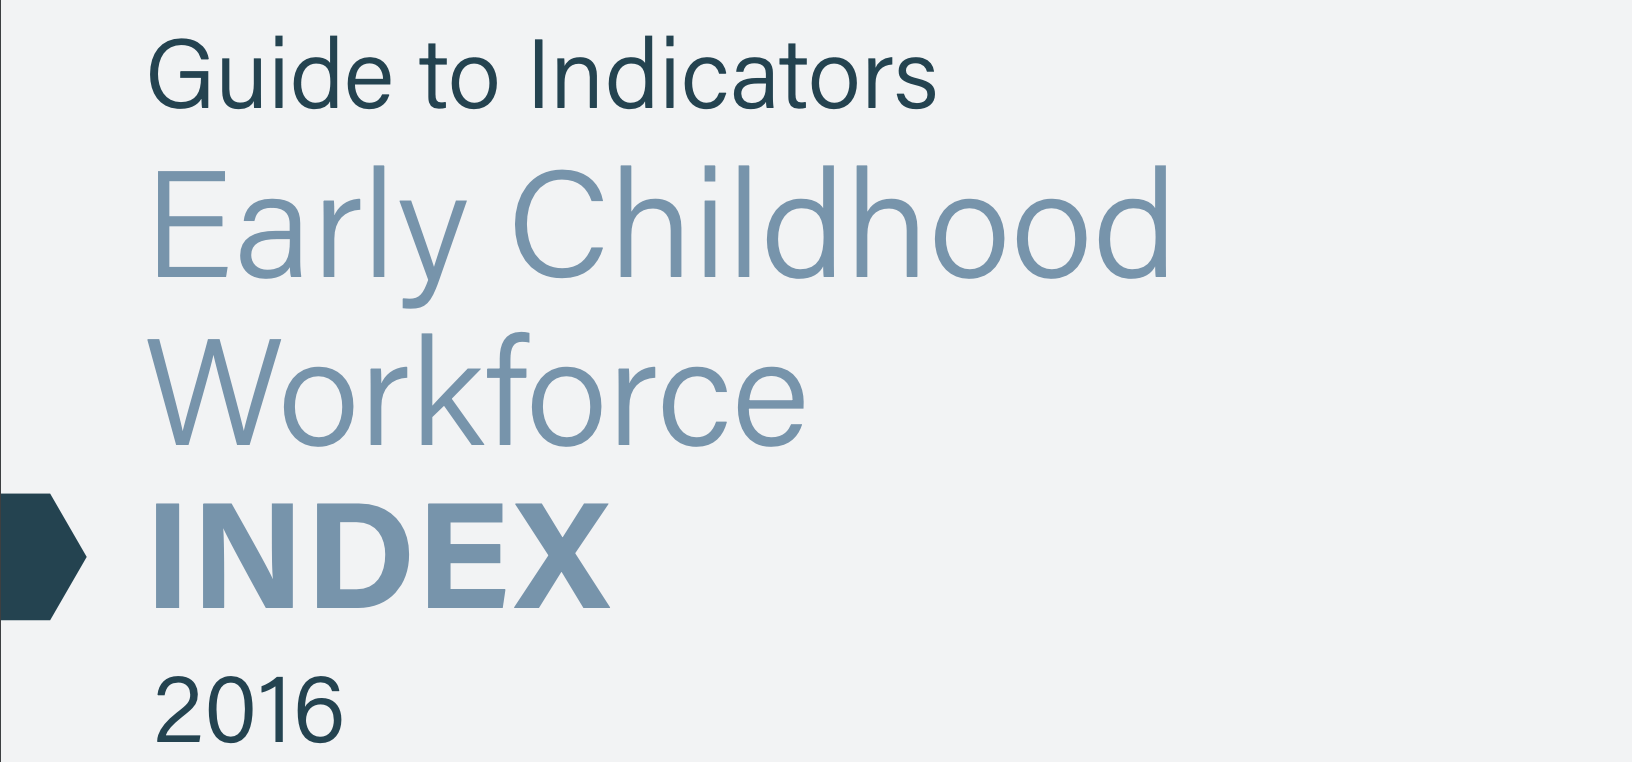 Guide to Indicators thumbnail, Early Childhood Workforce Index 2016